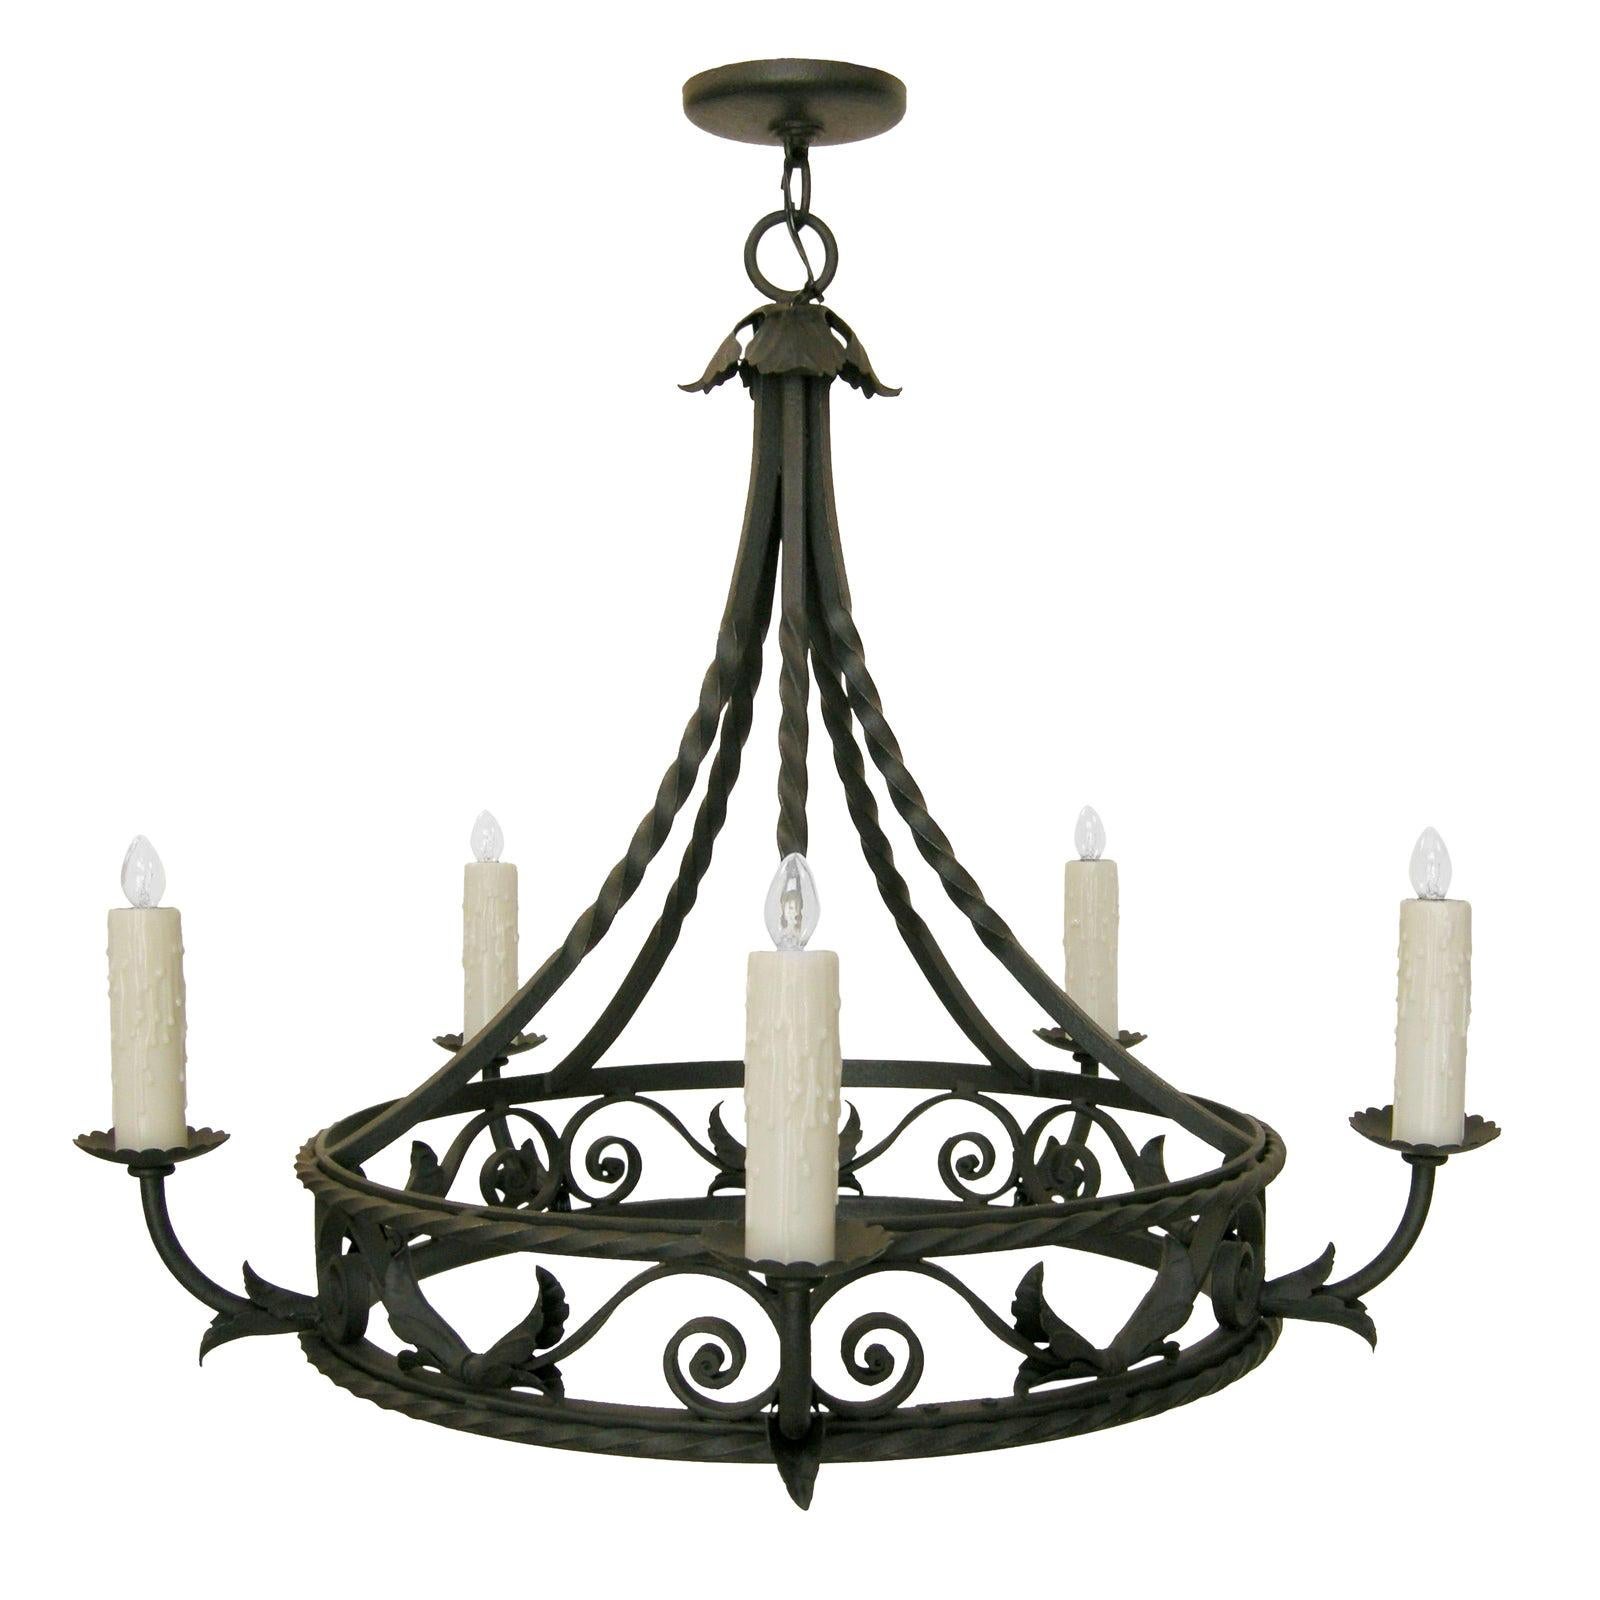 Spanish Colonial Wrought Iron Five-Light Chandelier by Randy Esada